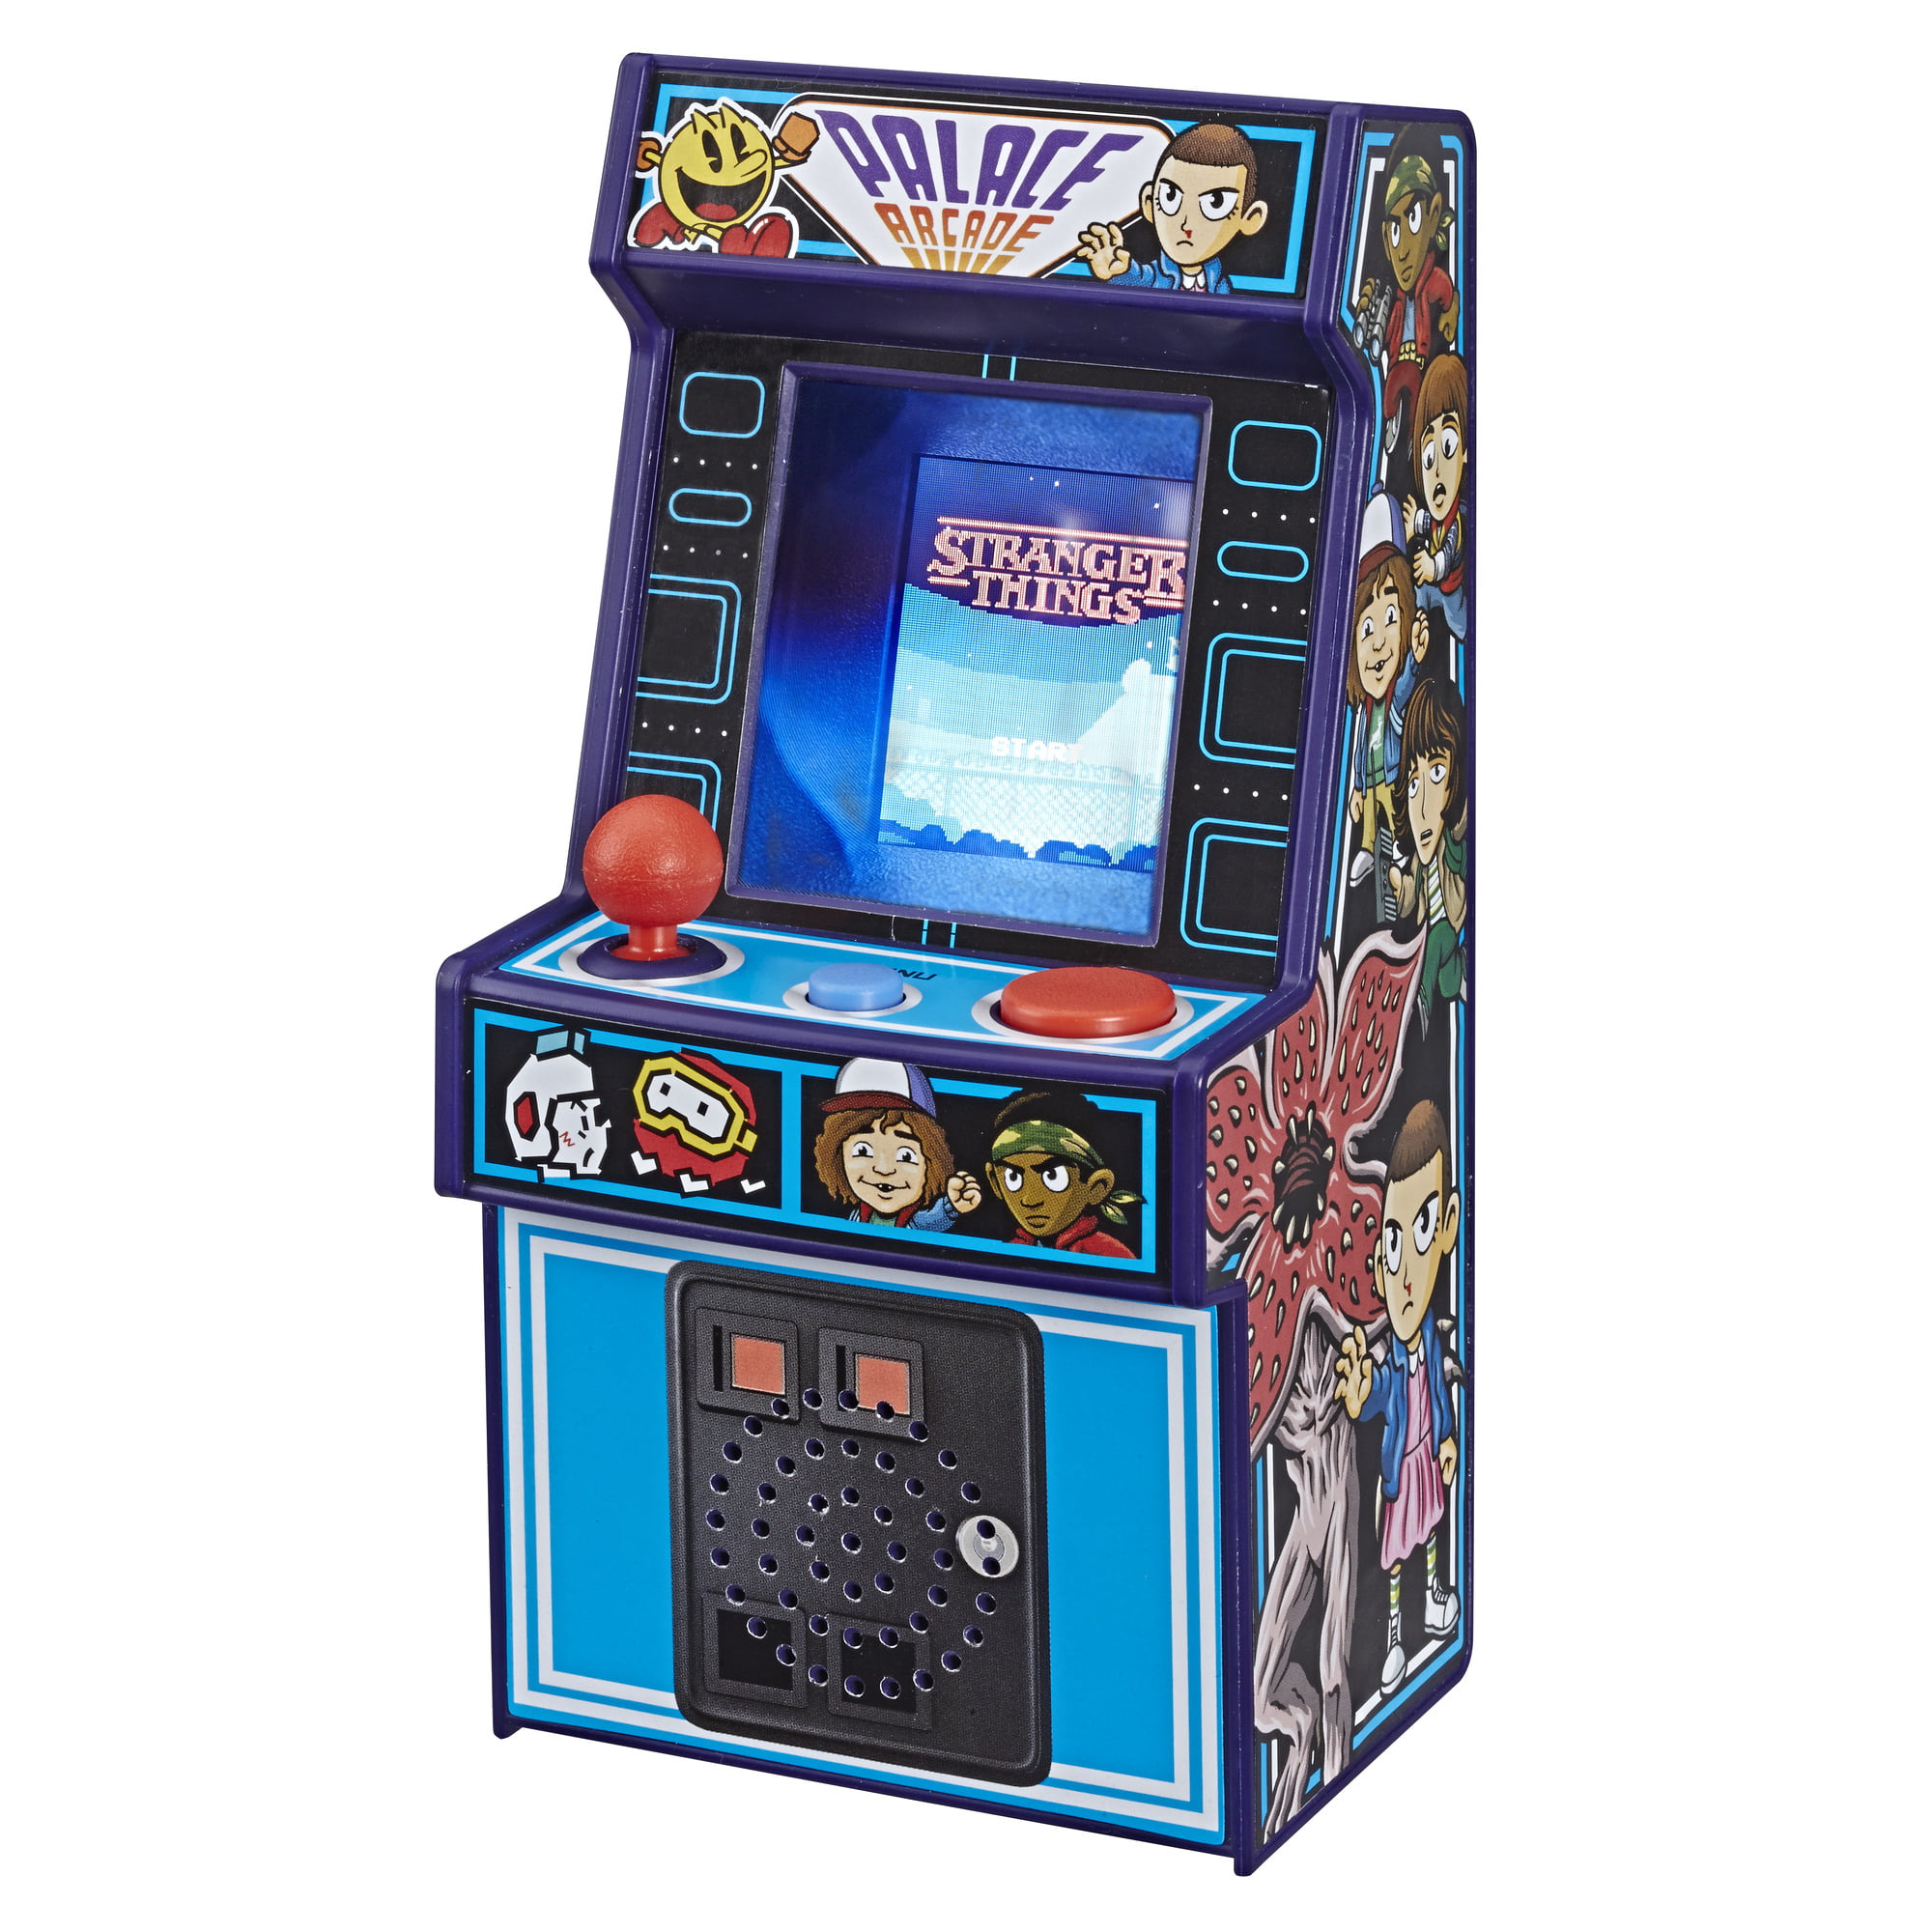 Hasbro Stranger Things Palace Arcade Handheld Electronic Game E5640 for sale online Multicoloured 